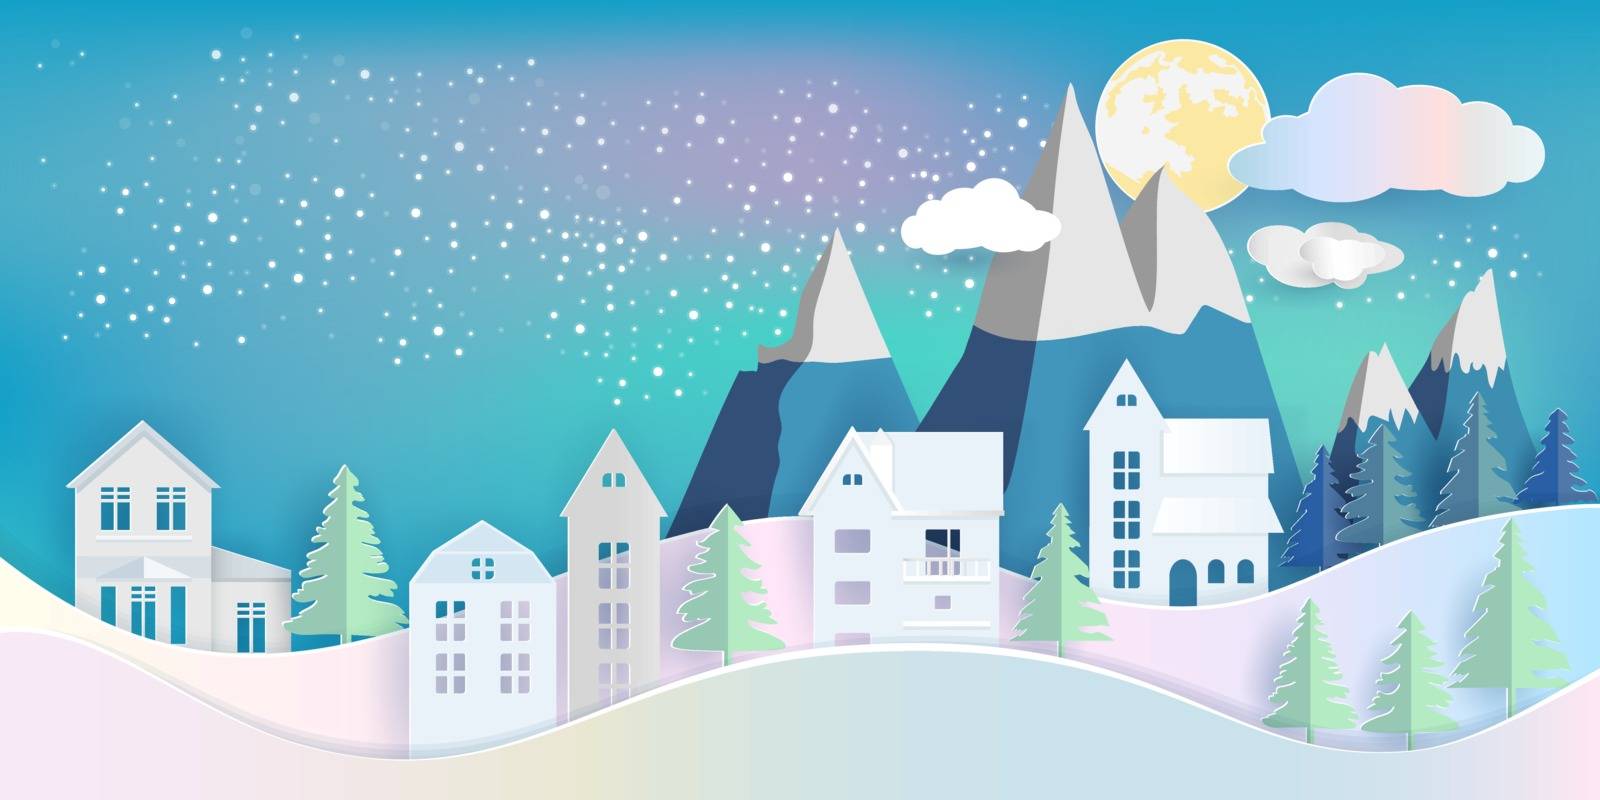 View of house and pine tree with mountain in winter night under yellow full moon and cloud. paper art design vector illustration for christmas background.